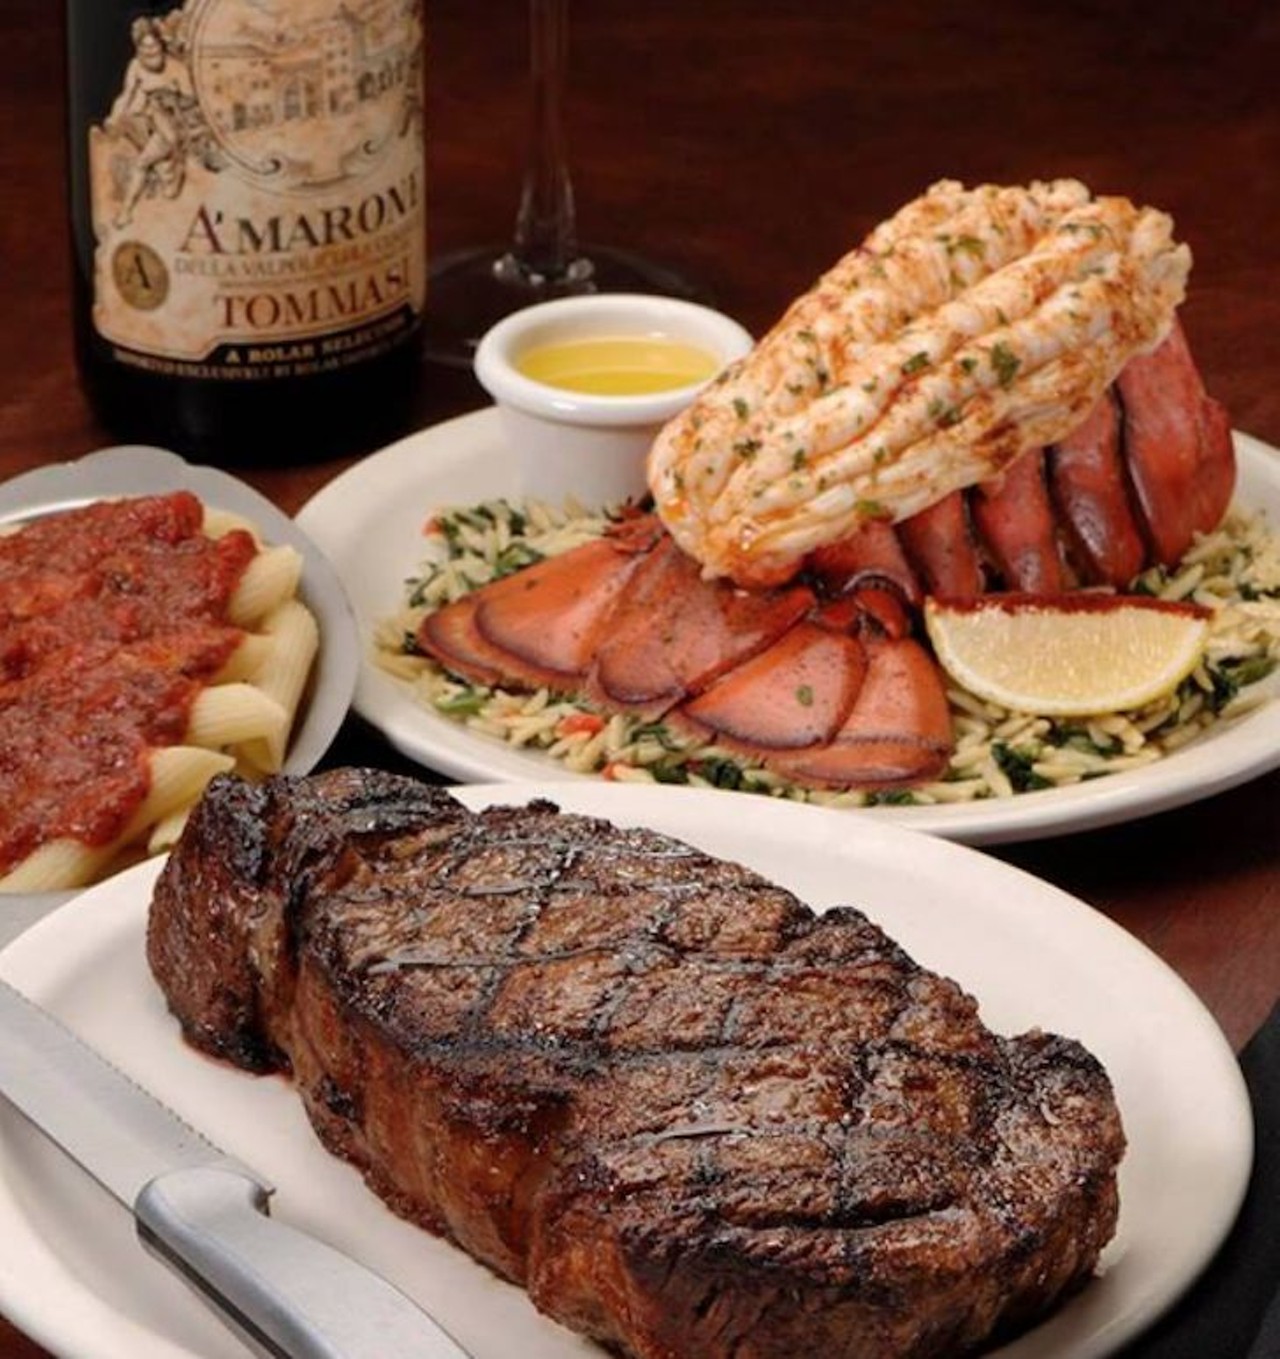 Delmonico&#146;s Italian Steakhouse
3284 Margaritaville Blvd, Kissimmee; 407-890-0104; estimated open date: date not specified
This restaurant offers traditional Italian cuisine with an atmosphere filled with Frank Sinatra and Rat Pack music and caricatures, creating a &#147;big city feel.&#148;
Photo via Delmonico&#146;s Italian Steakhouse Oviedo/Facebook